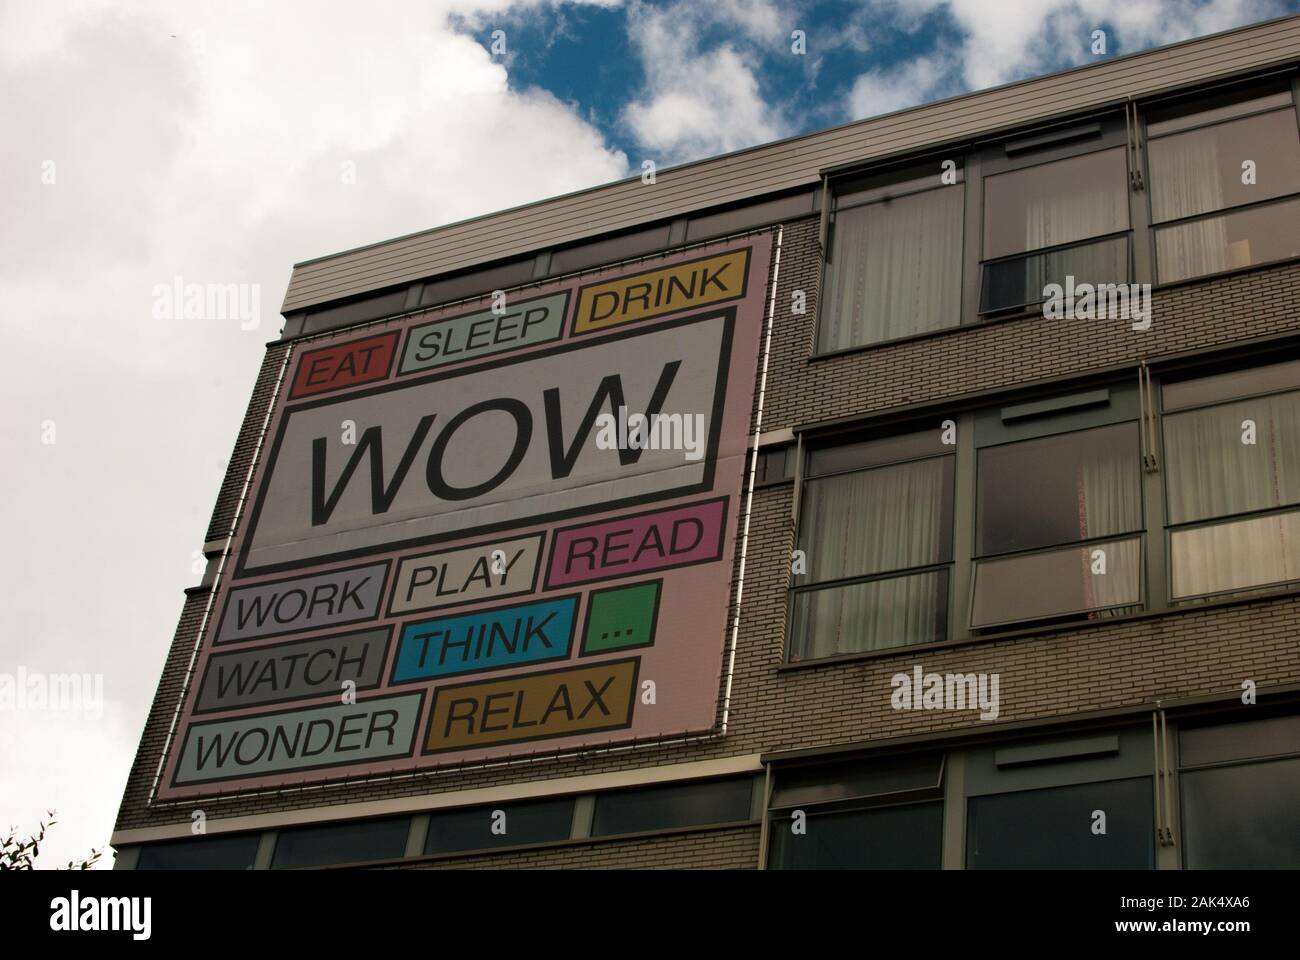 WOW hostel building in Amsterdam outdoor with Stock Photo